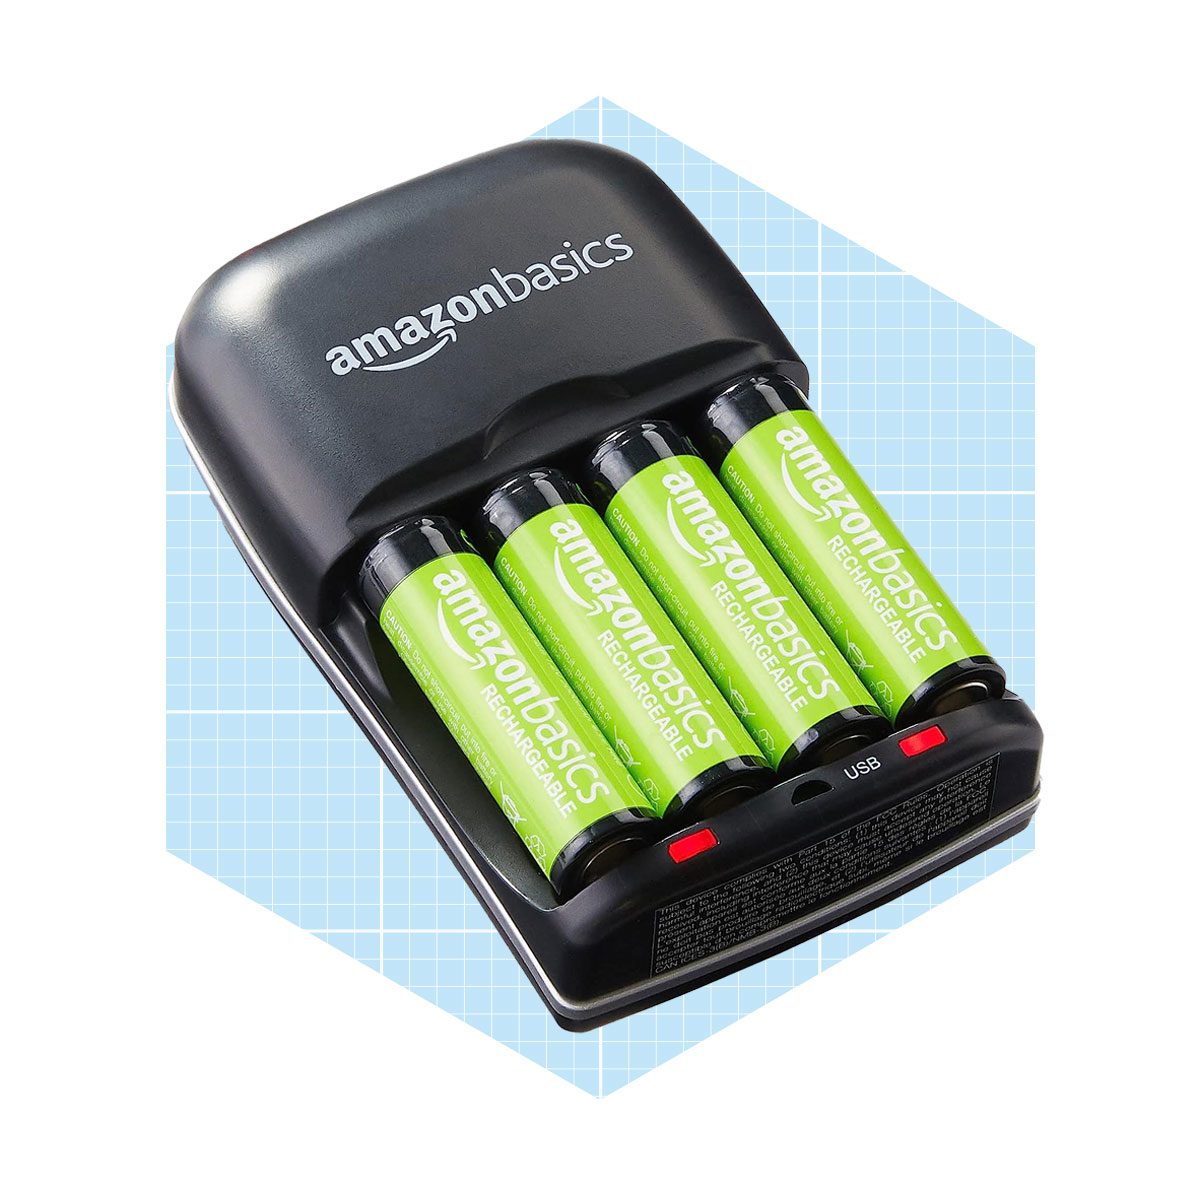 11 Rechargeable Battery Chargers to Reduce and Reuse Your Batteries